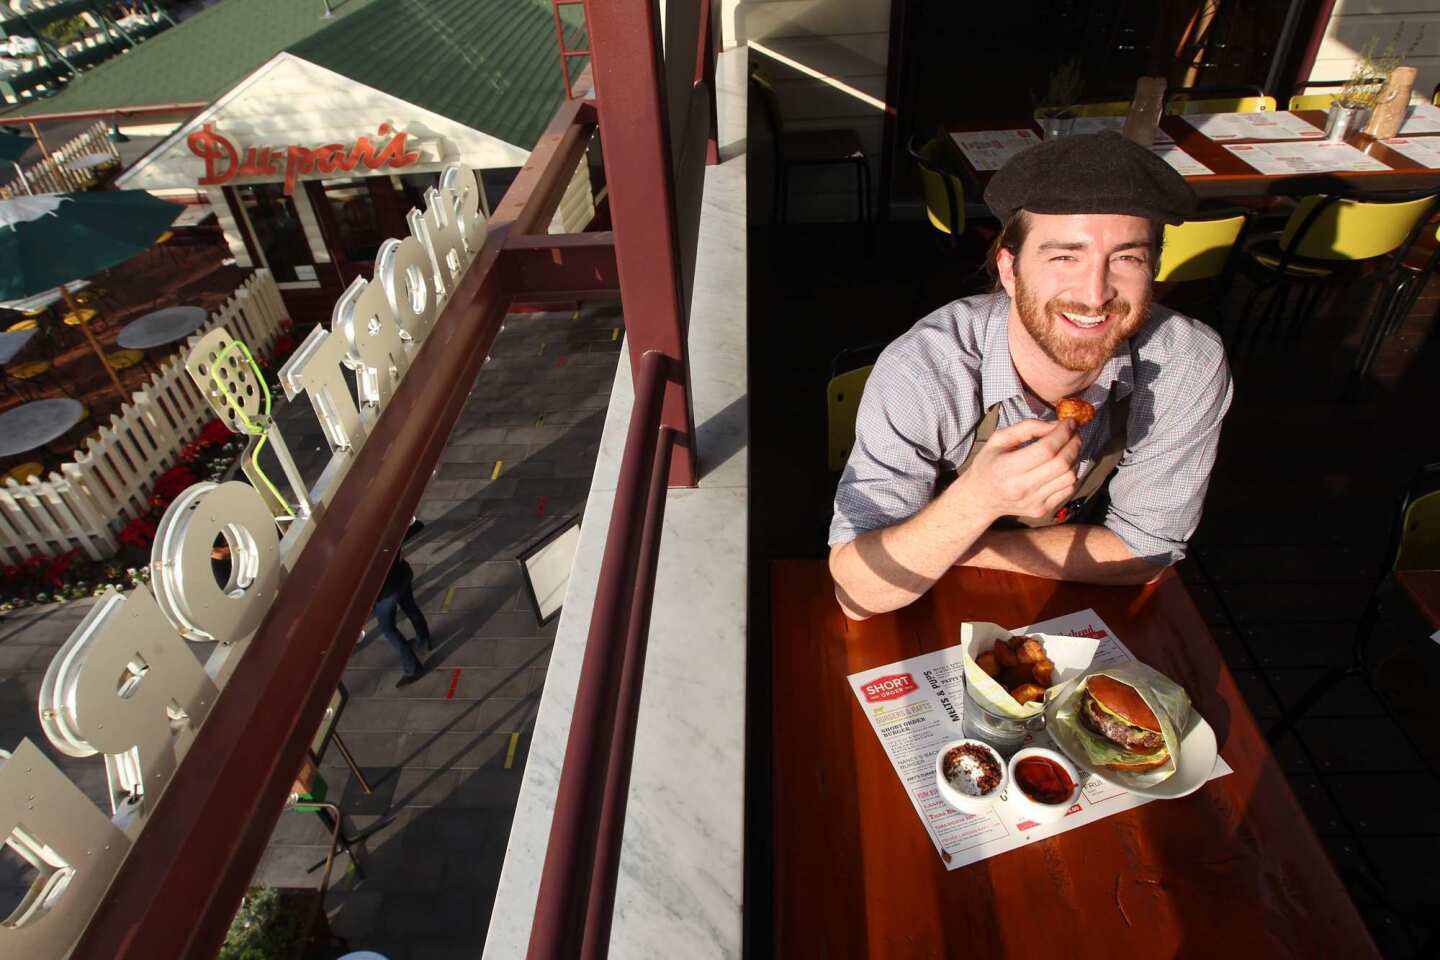 Short Order chef Christian Page dines on the restaurant's specialty "spuds" and a burger on the upstairs terrace.